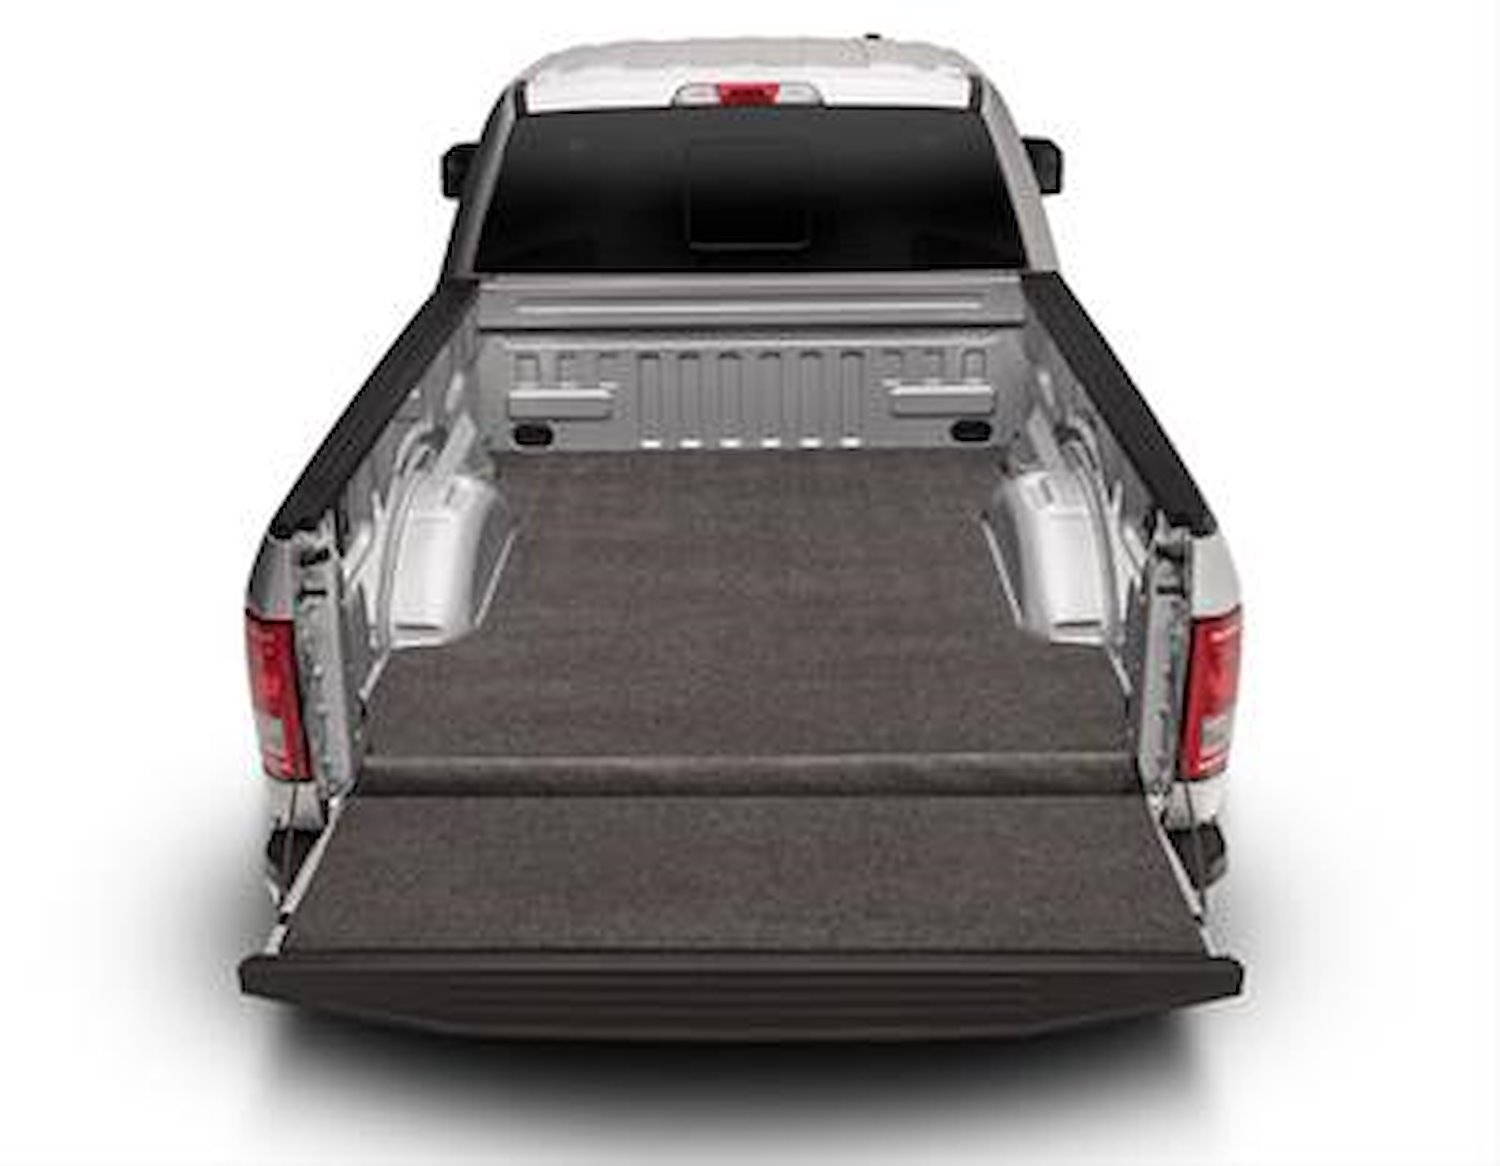 XLTBMY07RBS XLT BEDMAT FOR SPRAY-IN OR NO BED LINER 07-21 TOYOTA TUNDRA 6'6" BED